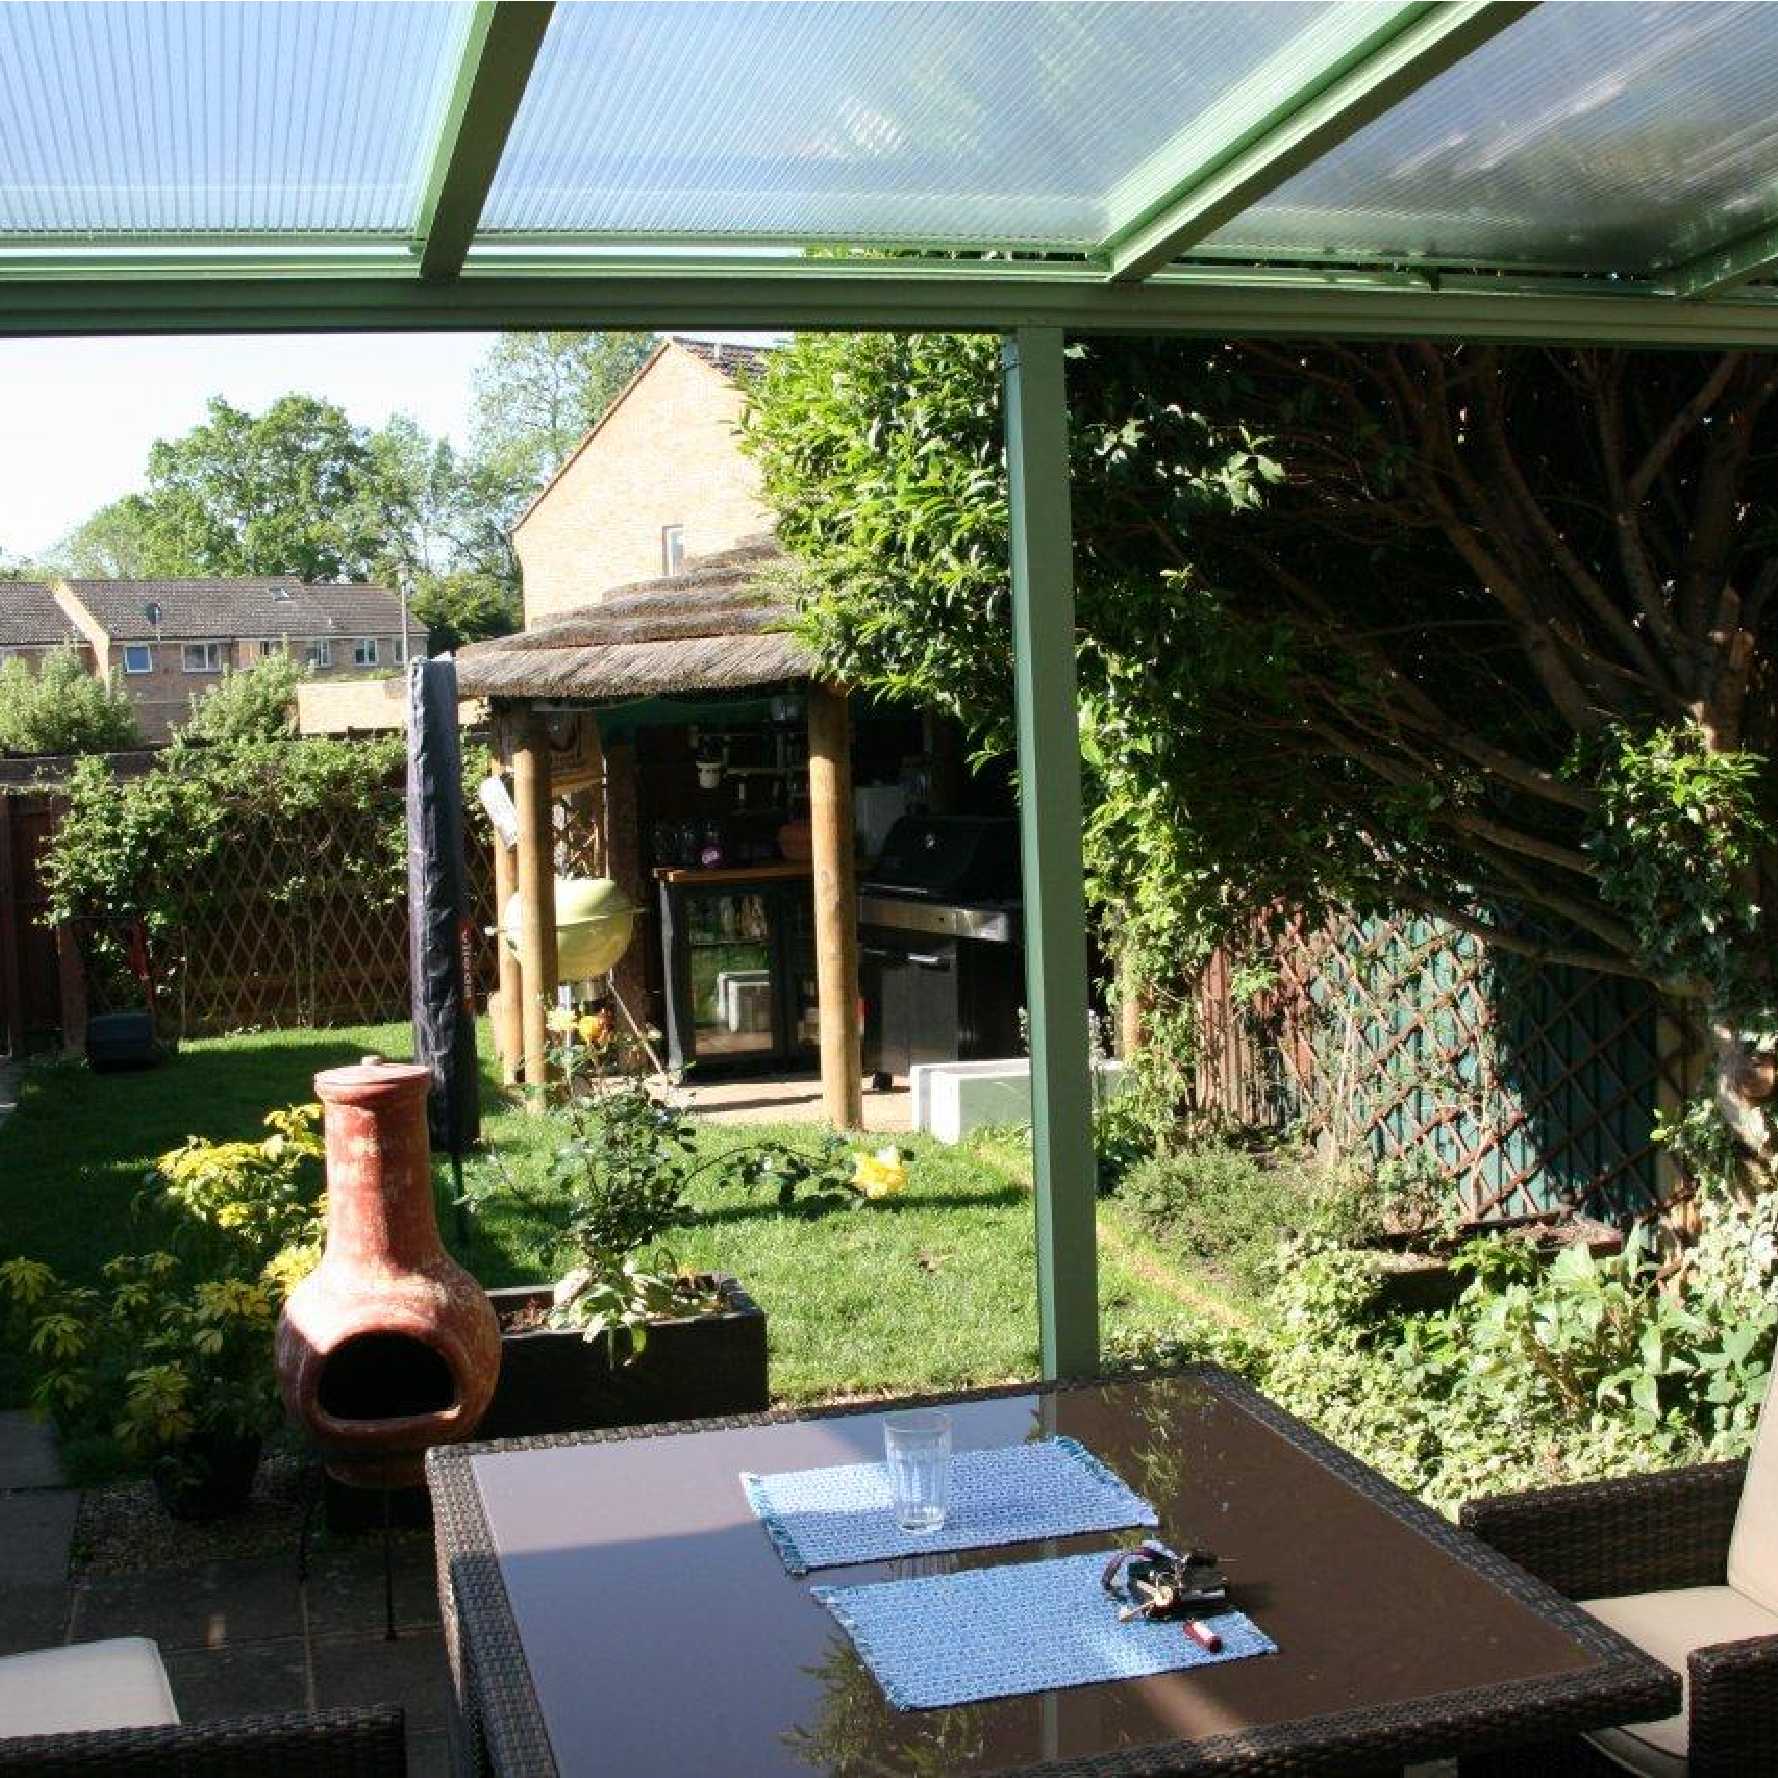 Affordable Omega Smart Lean-To Canopy, White with 16mm Polycarbonate Glazing - 4.2m (W) x 2.0m (P), (3) Supporting Posts